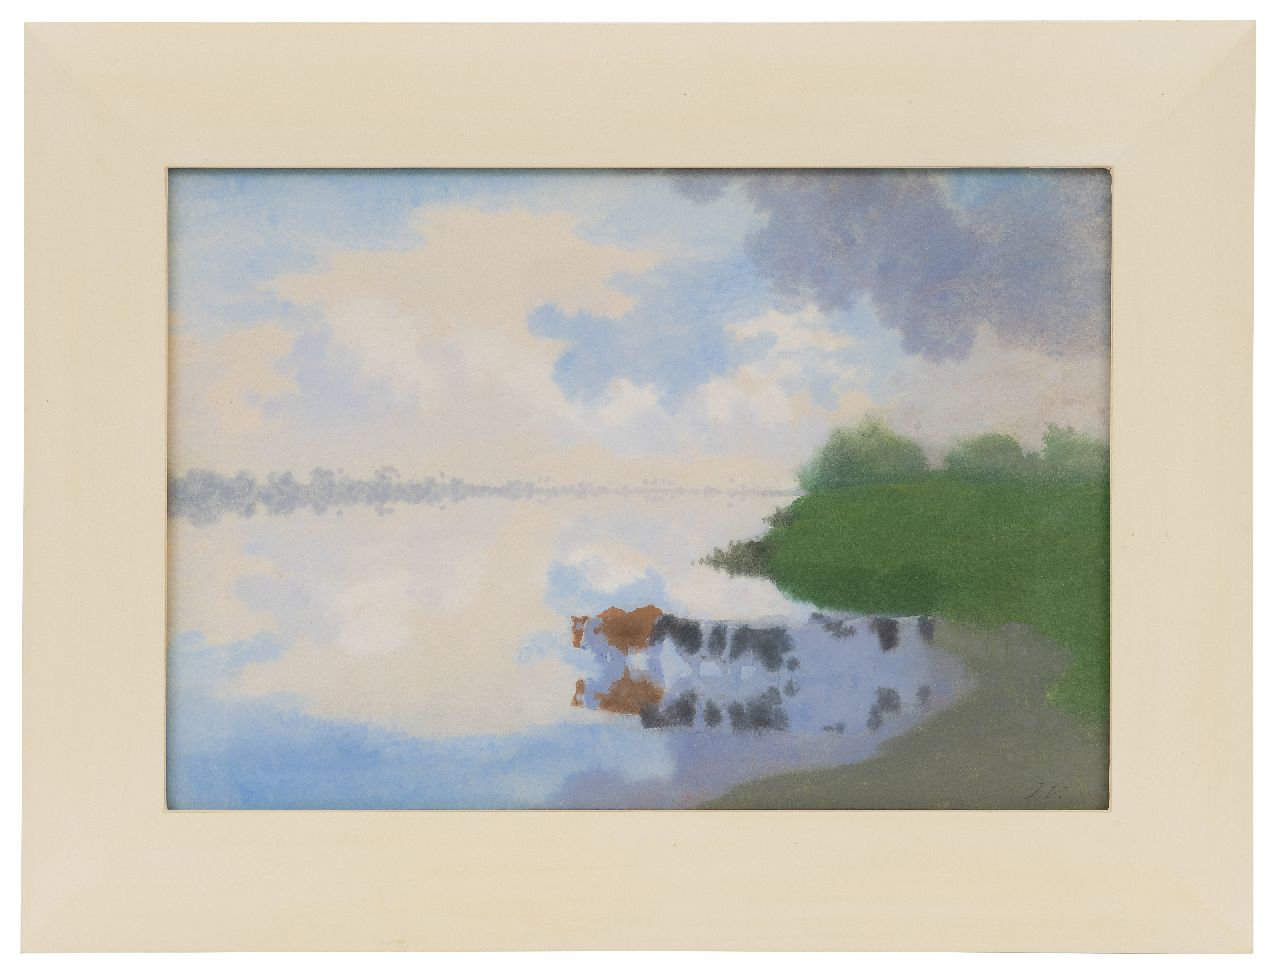 Voerman sr. J.  | Jan Voerman sr. | Watercolours and drawings offered for sale | Wading cattle, watercolour on paper 27.3 x 39.7 cm, signed l.r. with initials and painted in the 1890's